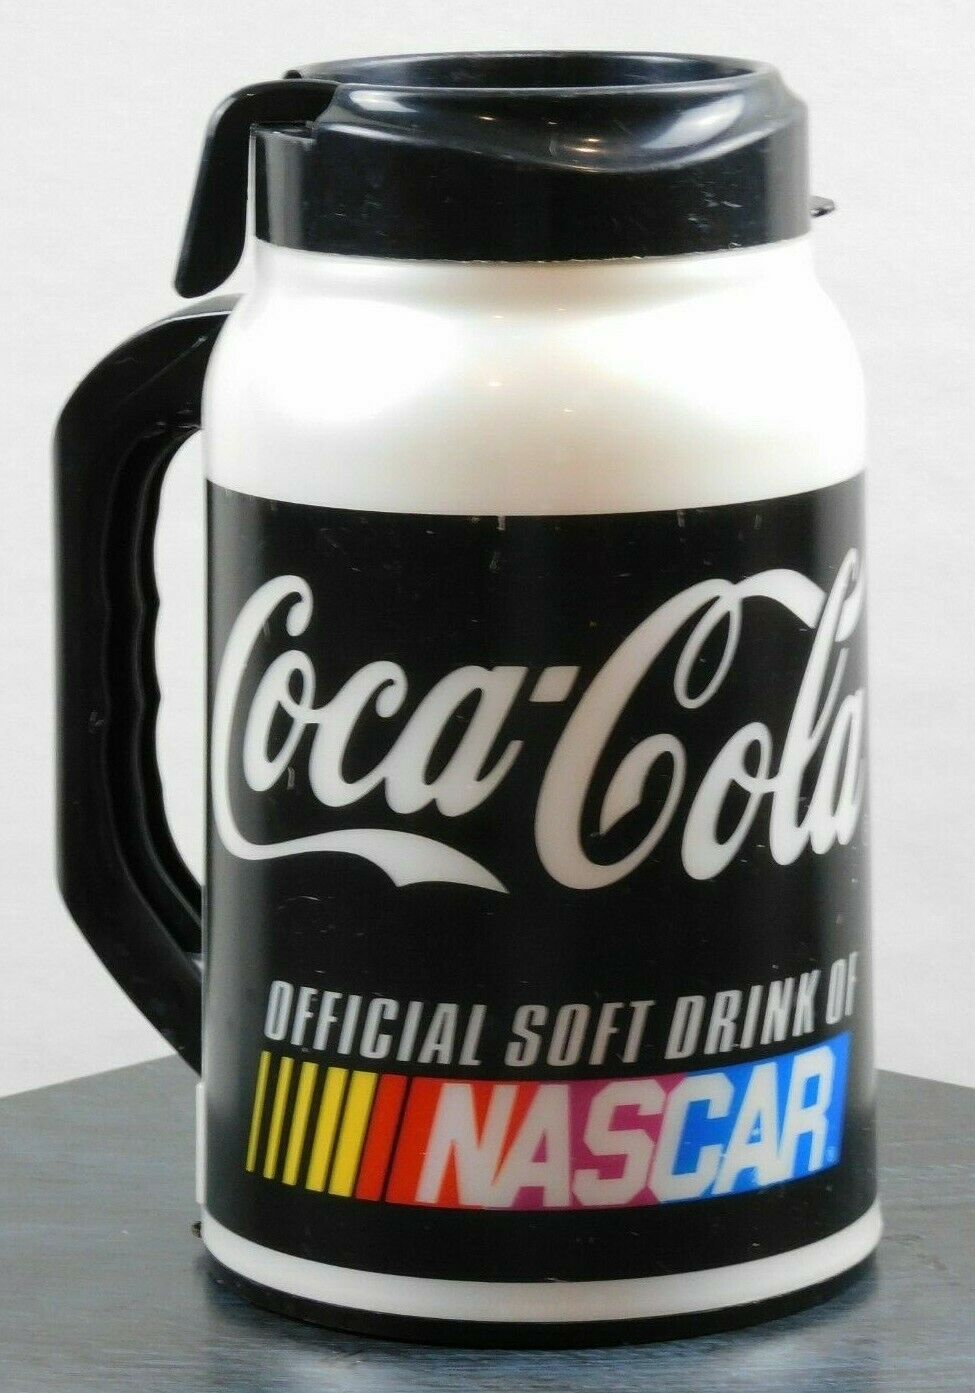 Autoking, 44oz, Coca-cola And Nascar, Insulated, Plastic Travel Cup